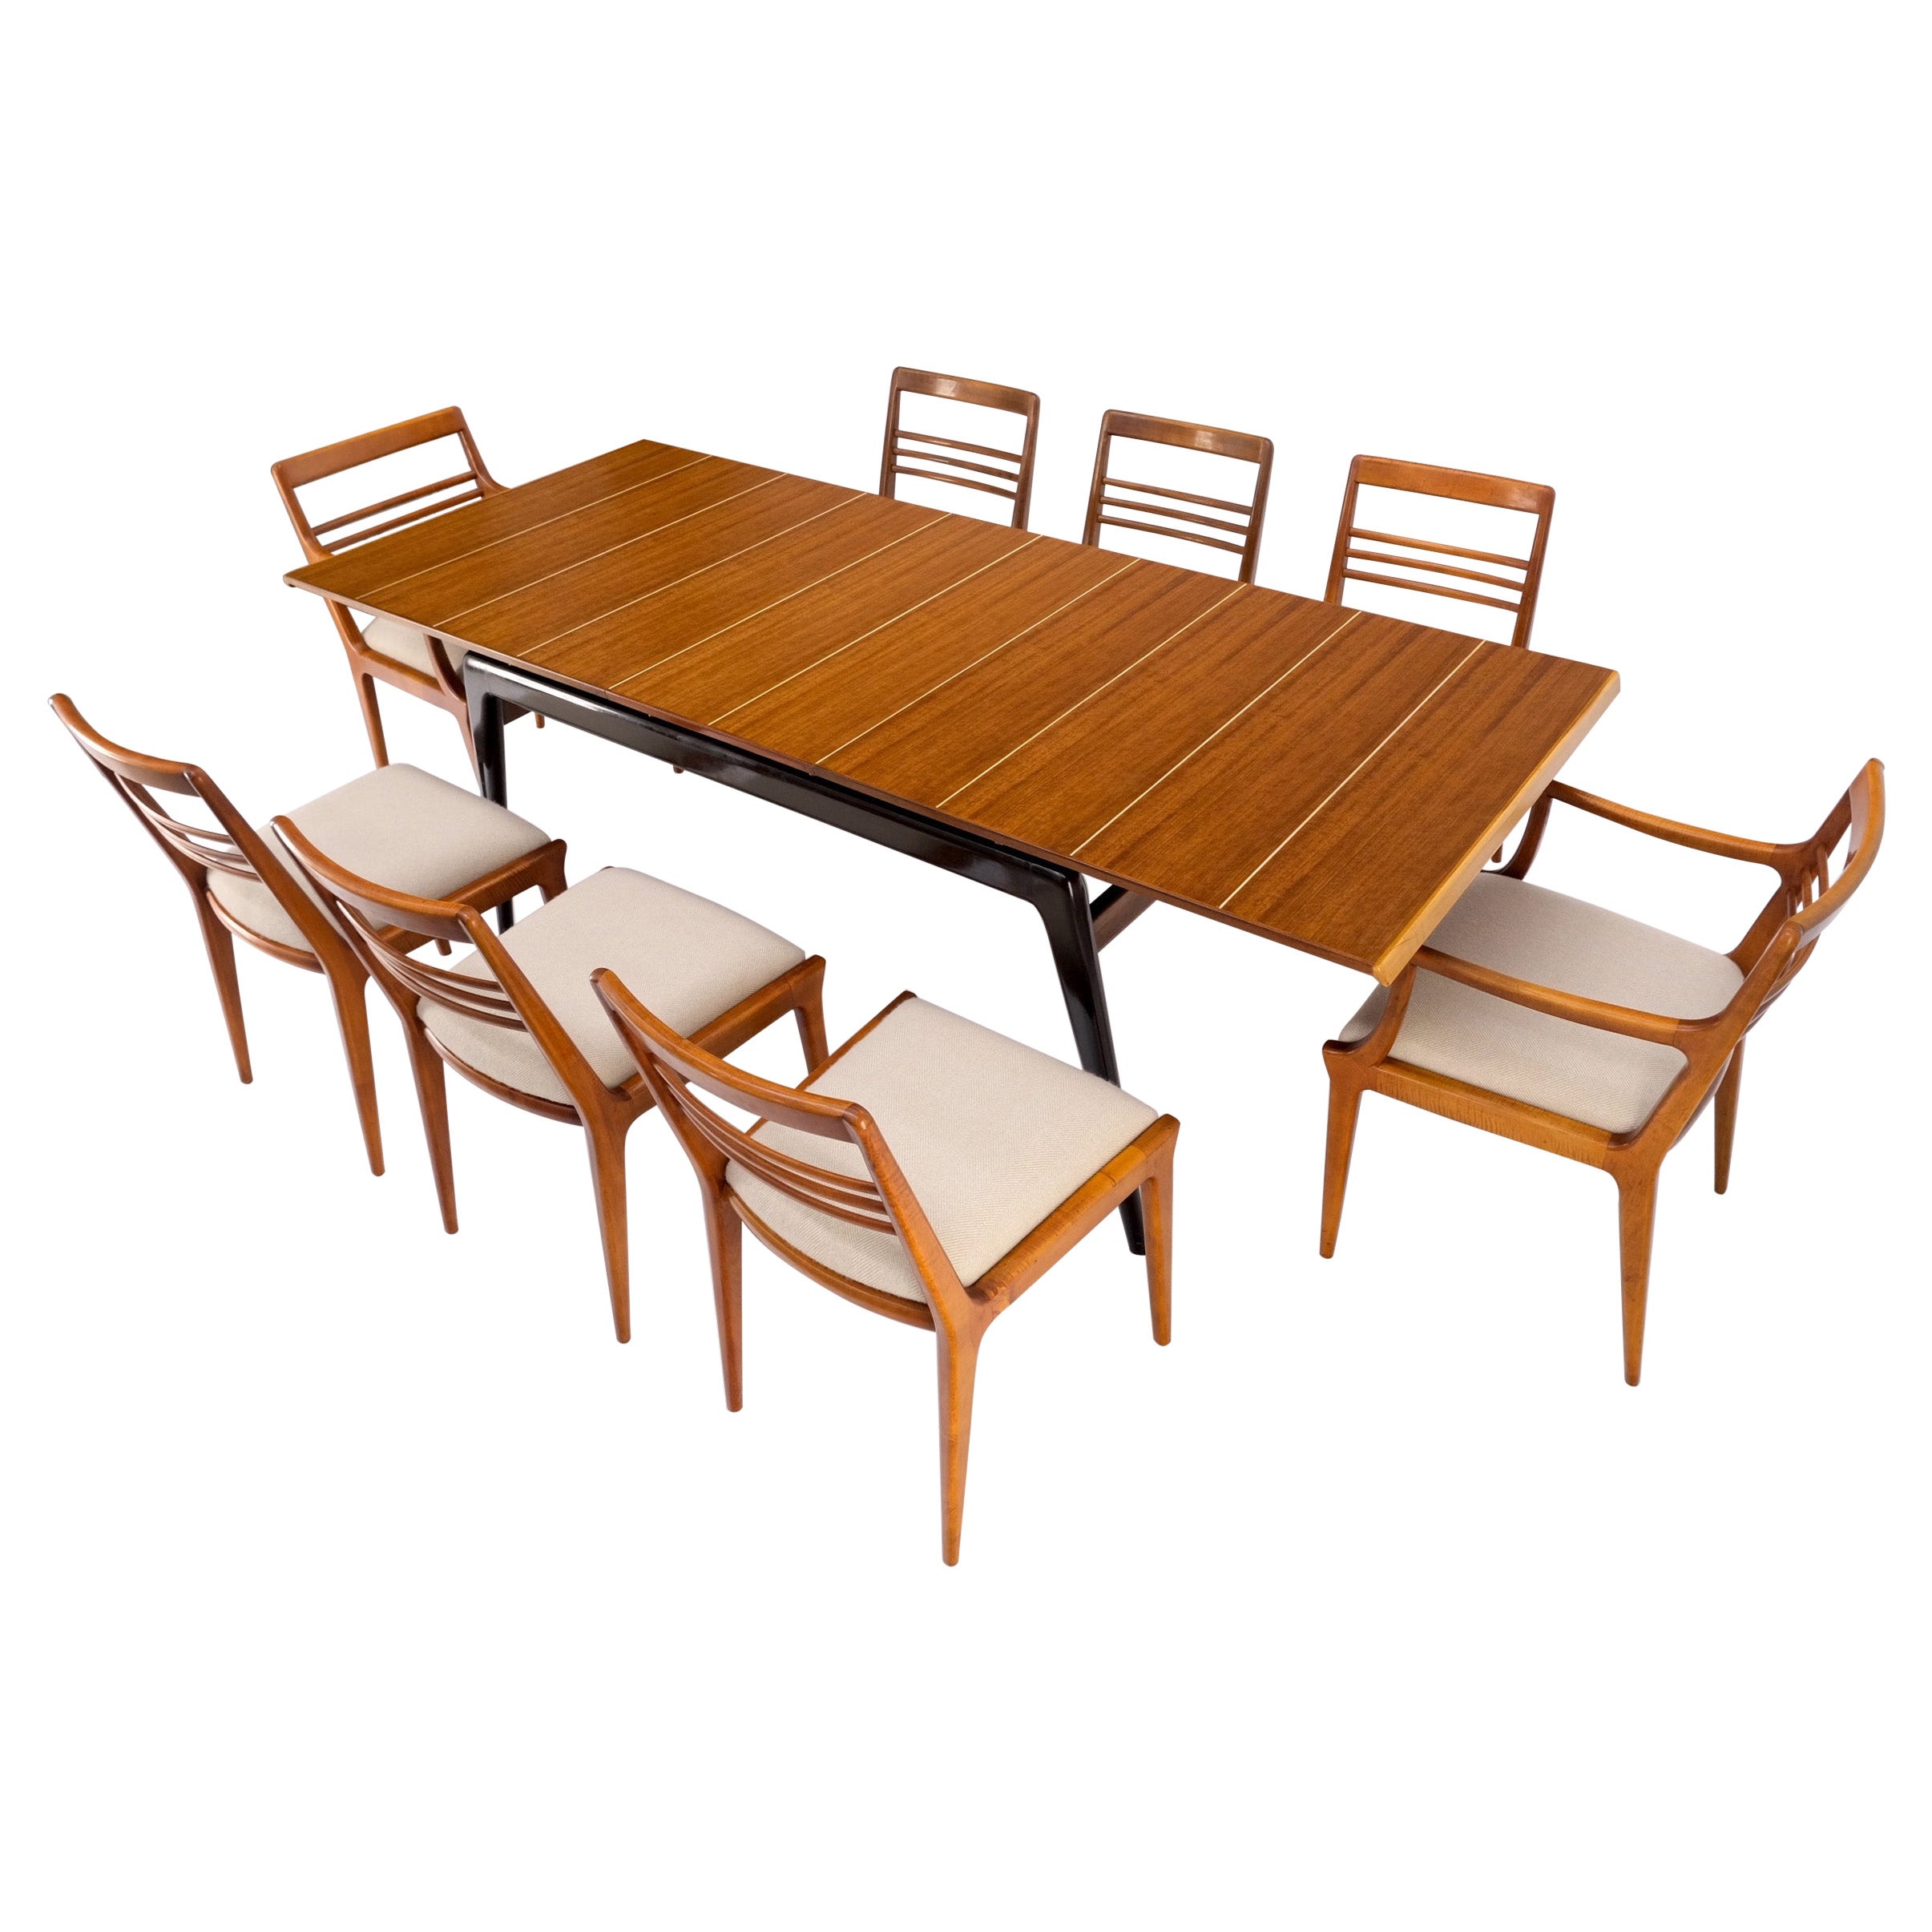 Italian Mid-Century Modern Dining Table 8 Chairs Set New Linen Upholstery Seats For Sale